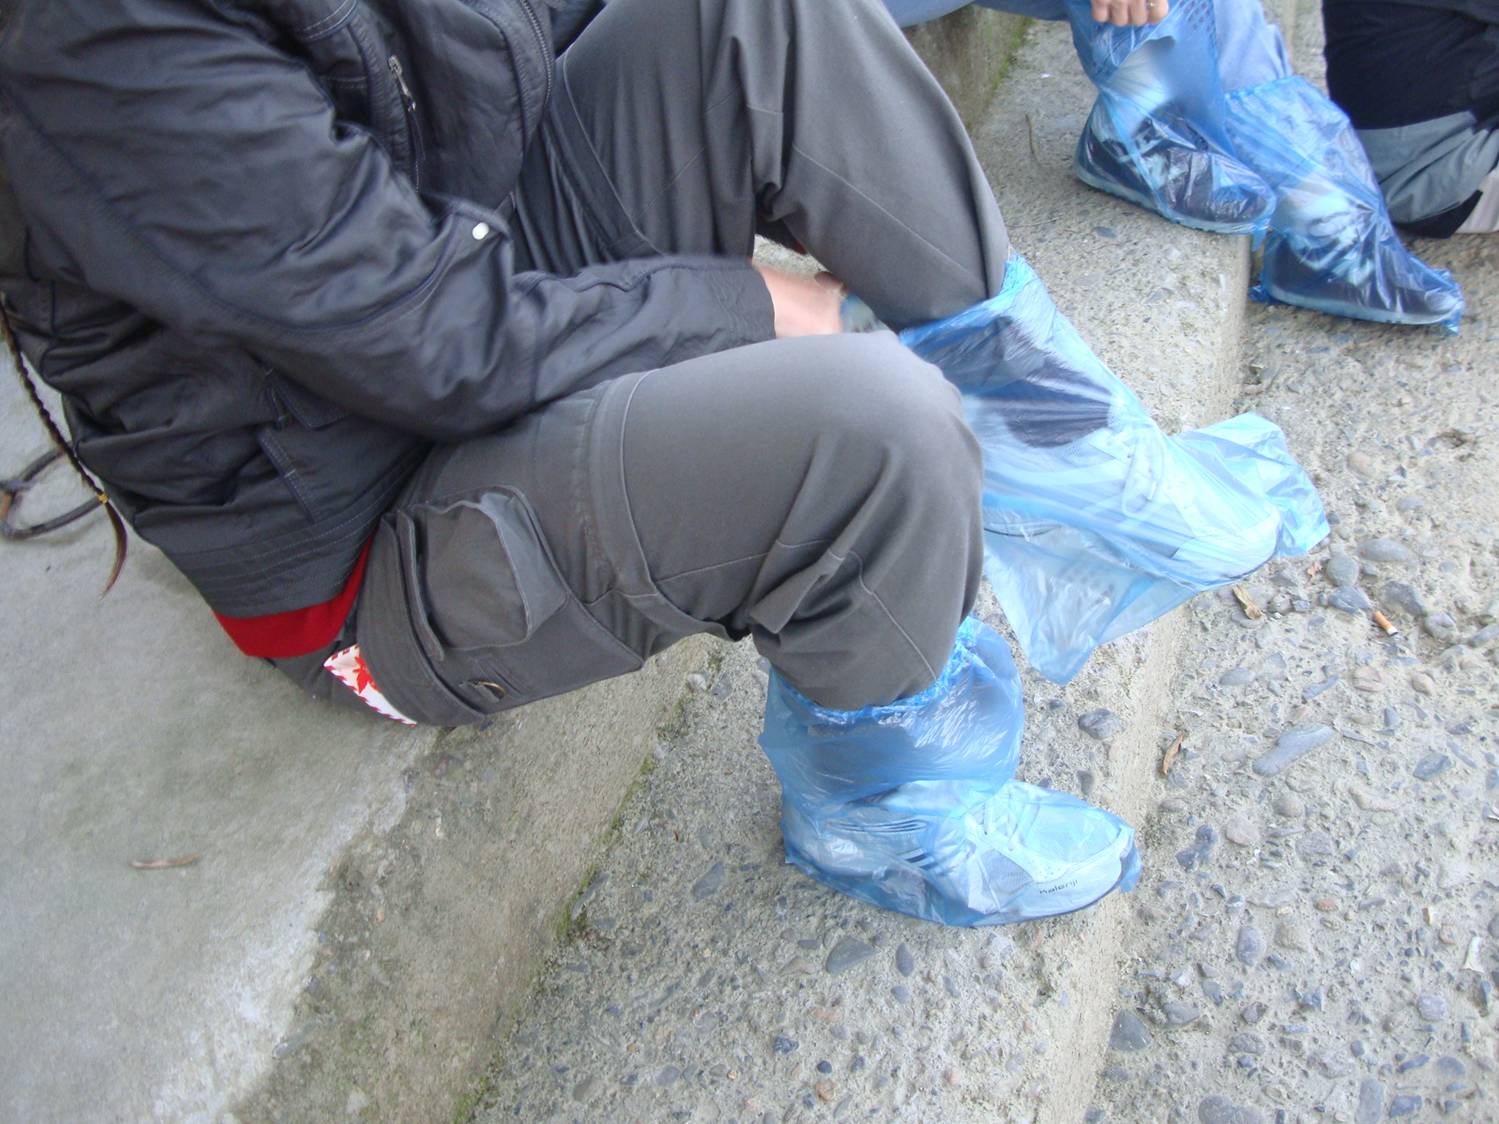 Picture:  The bags were too small for my foreigner feet, and very fragile.  This meant I had to keep my feet out of the water.  Zhejiang Province, China